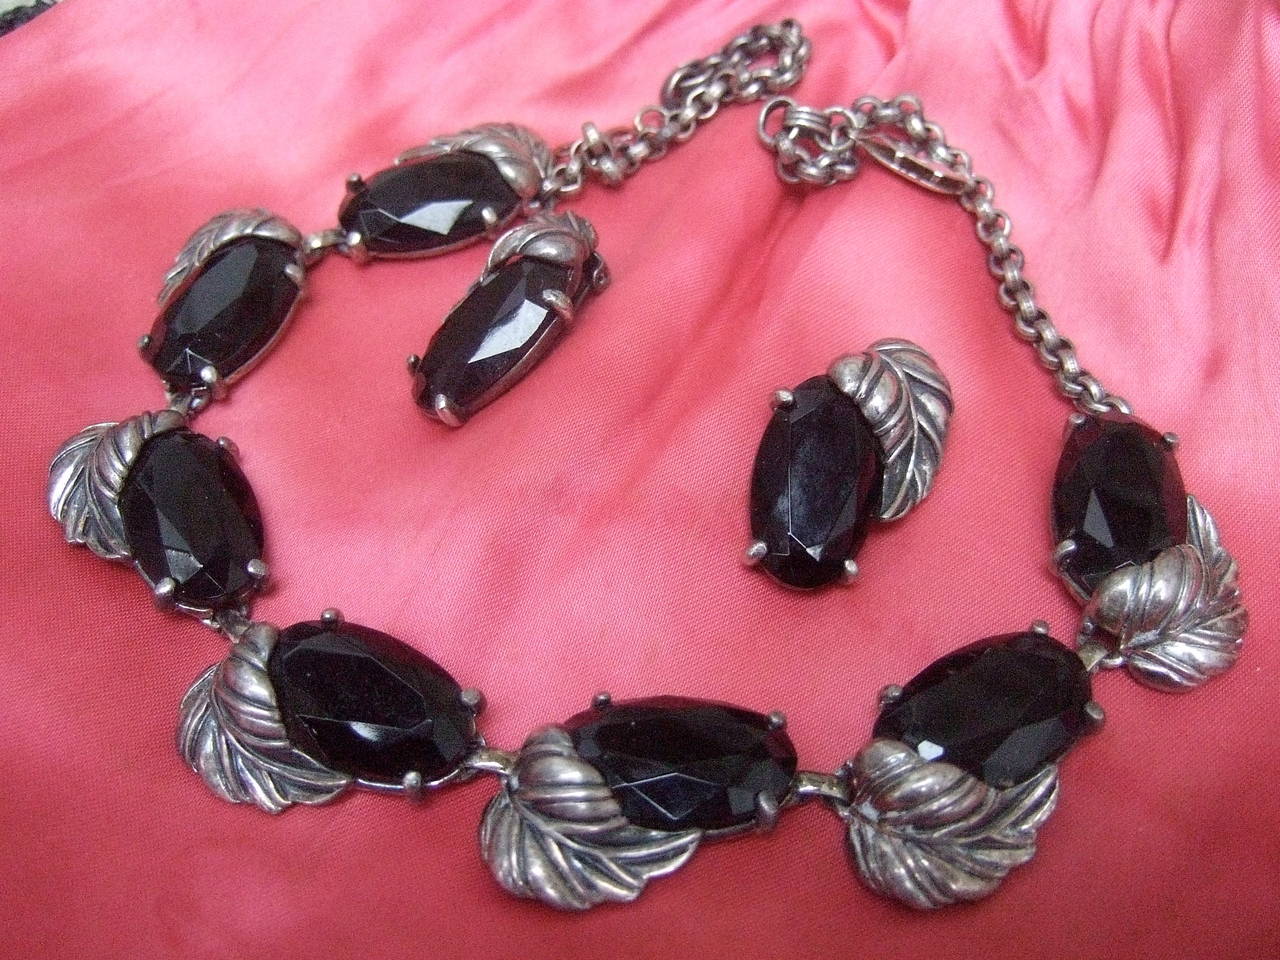            ****RESERVED SALE PENDING FOR ALLISON****

Schiaparelli Jet glass silver metal leaf necklace & earrings c 1950
The stylized necklace & earrings are designed with oval shaped faceted black glass settings accented with pewter tone metal